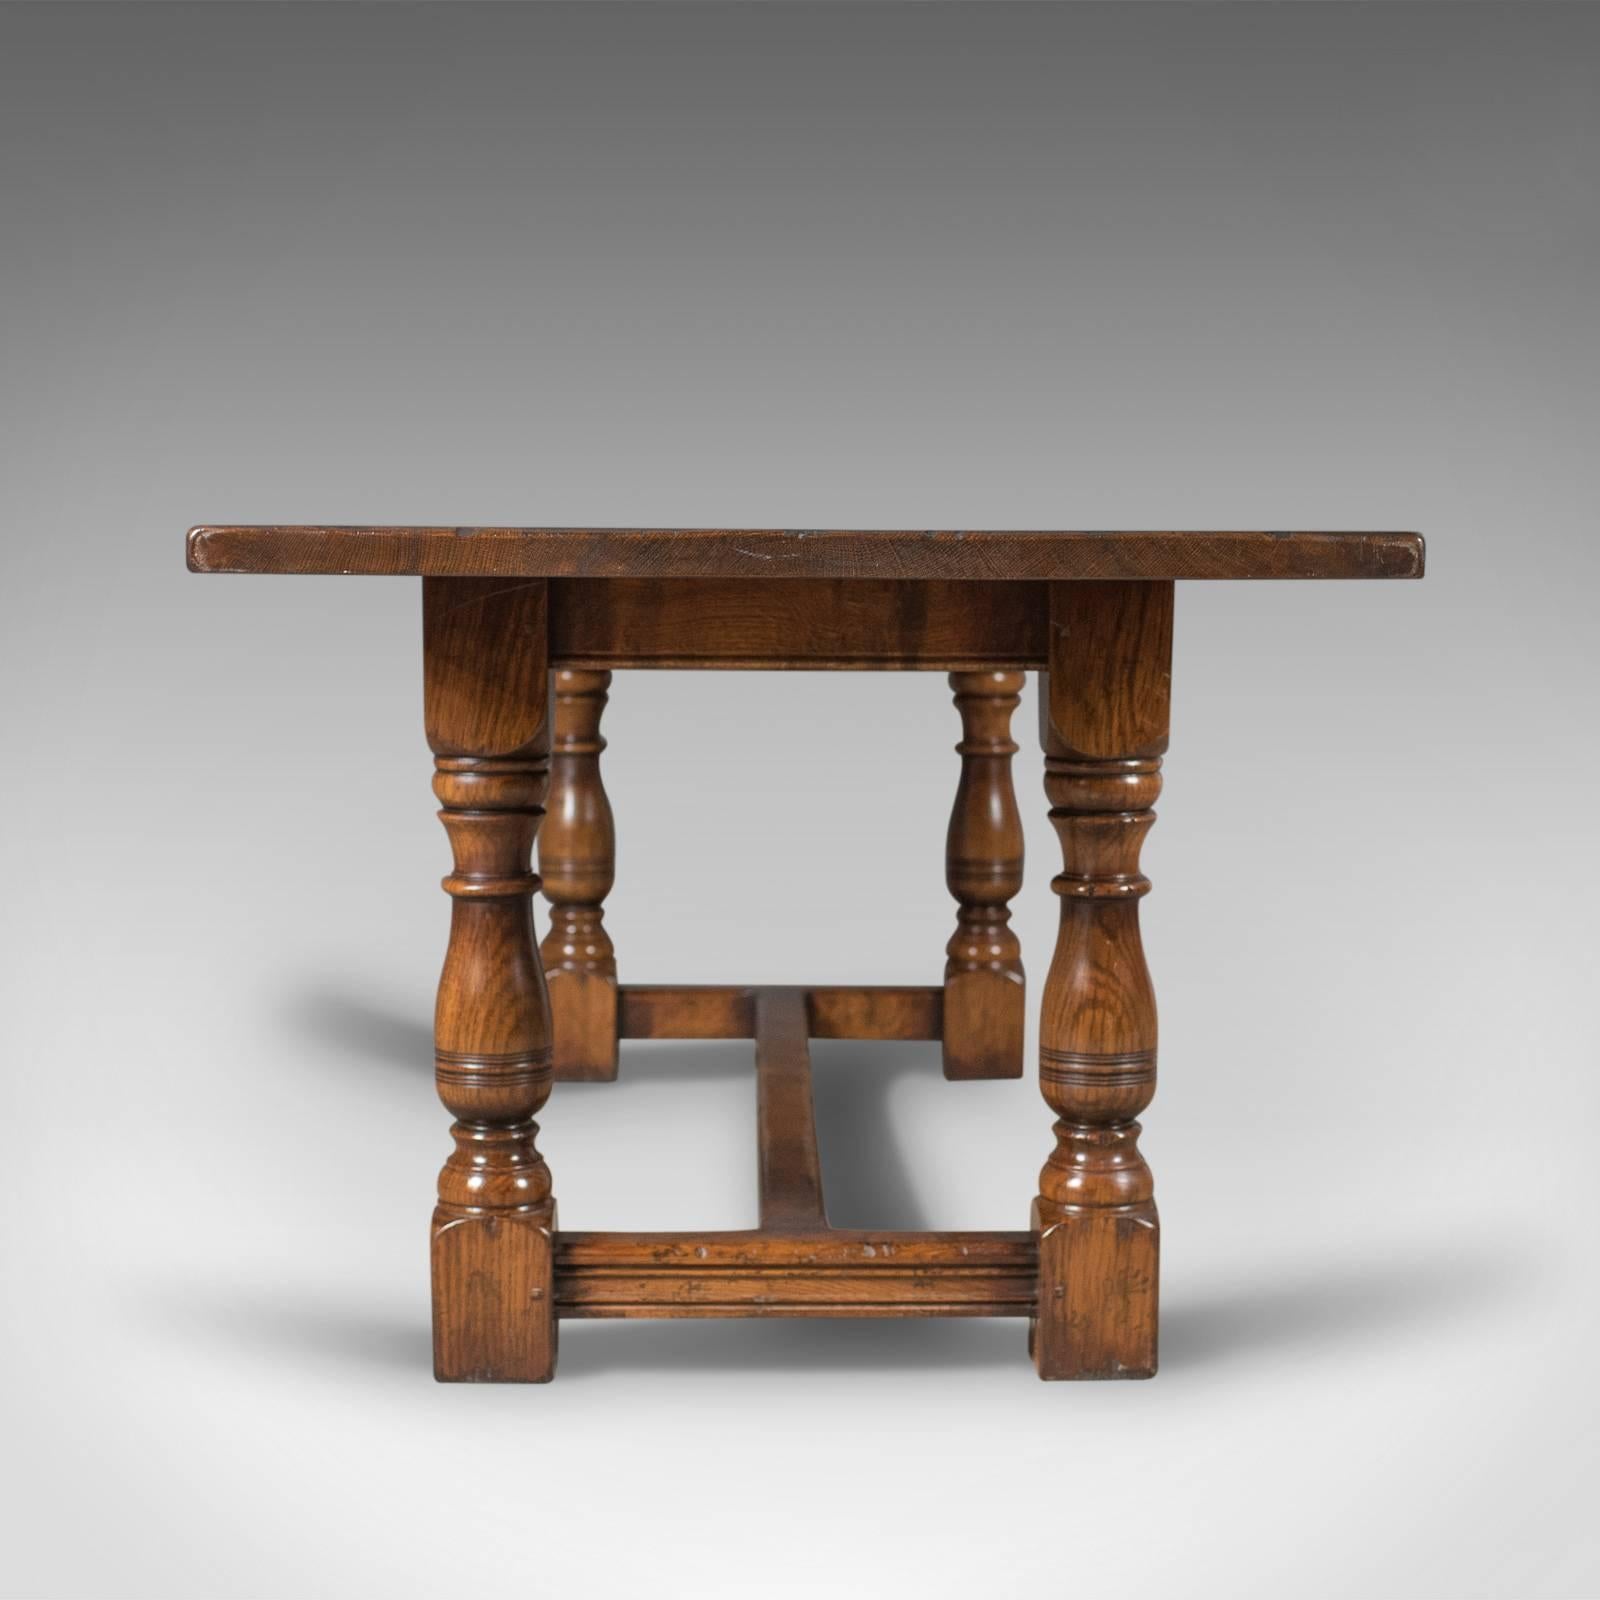 Great Britain (UK) Six-Eight-Seat Oak Refectory Table, 17th Century Revival, Late 20th Century